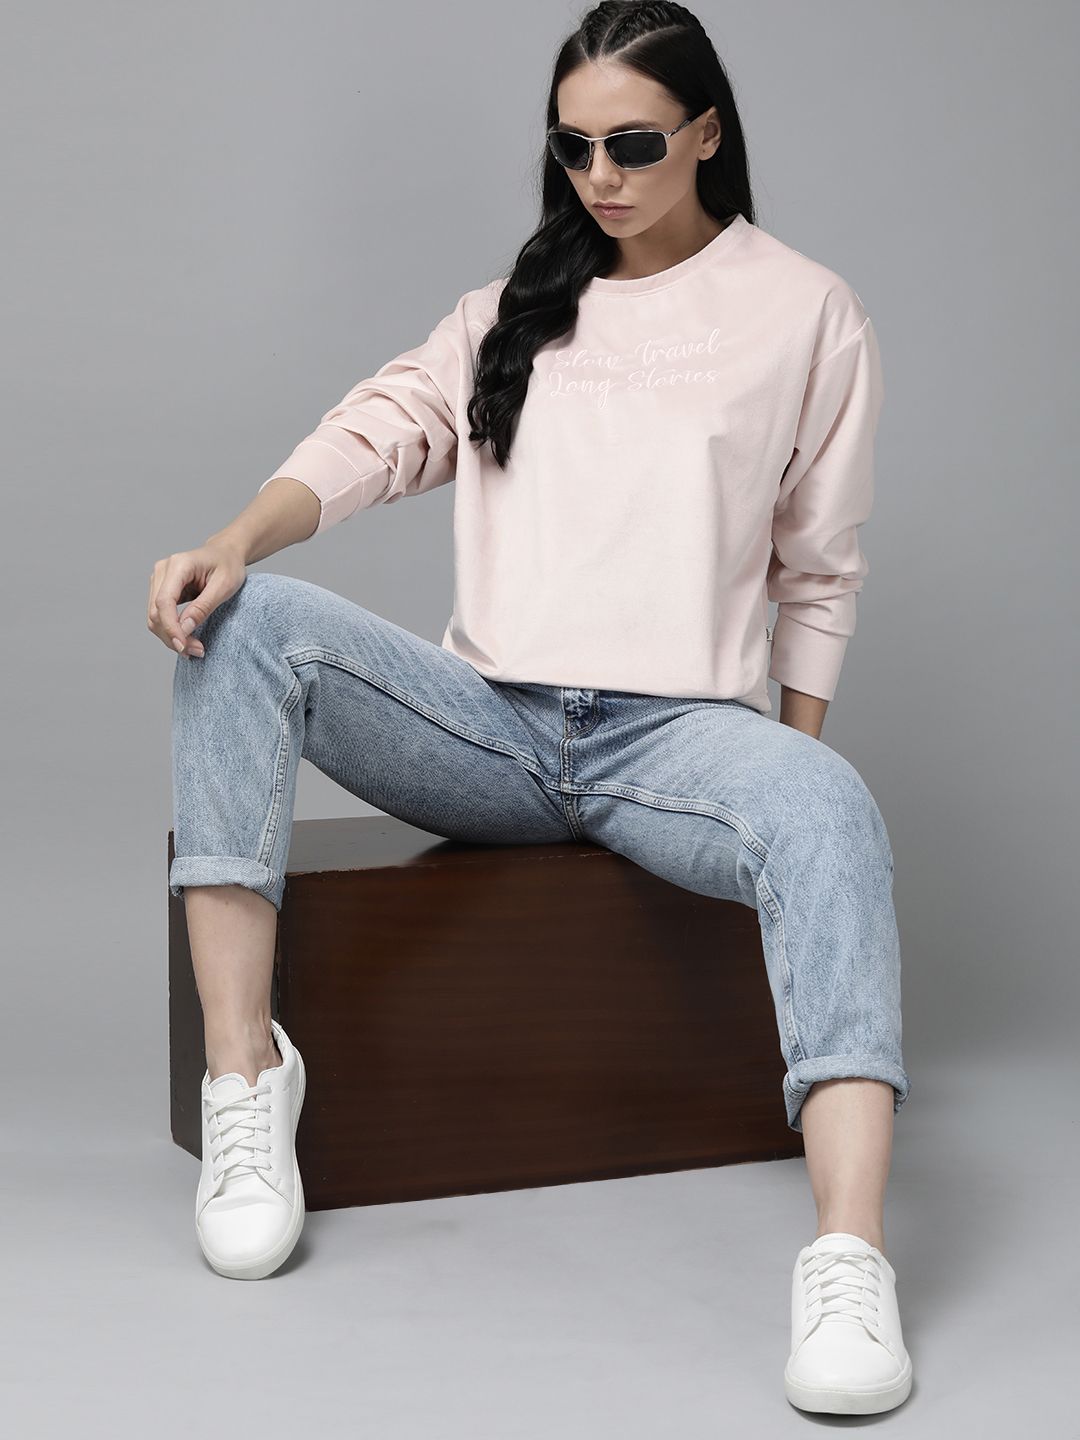 Roadster Women Pink Velour Embroidered Sweatshirt Price in India